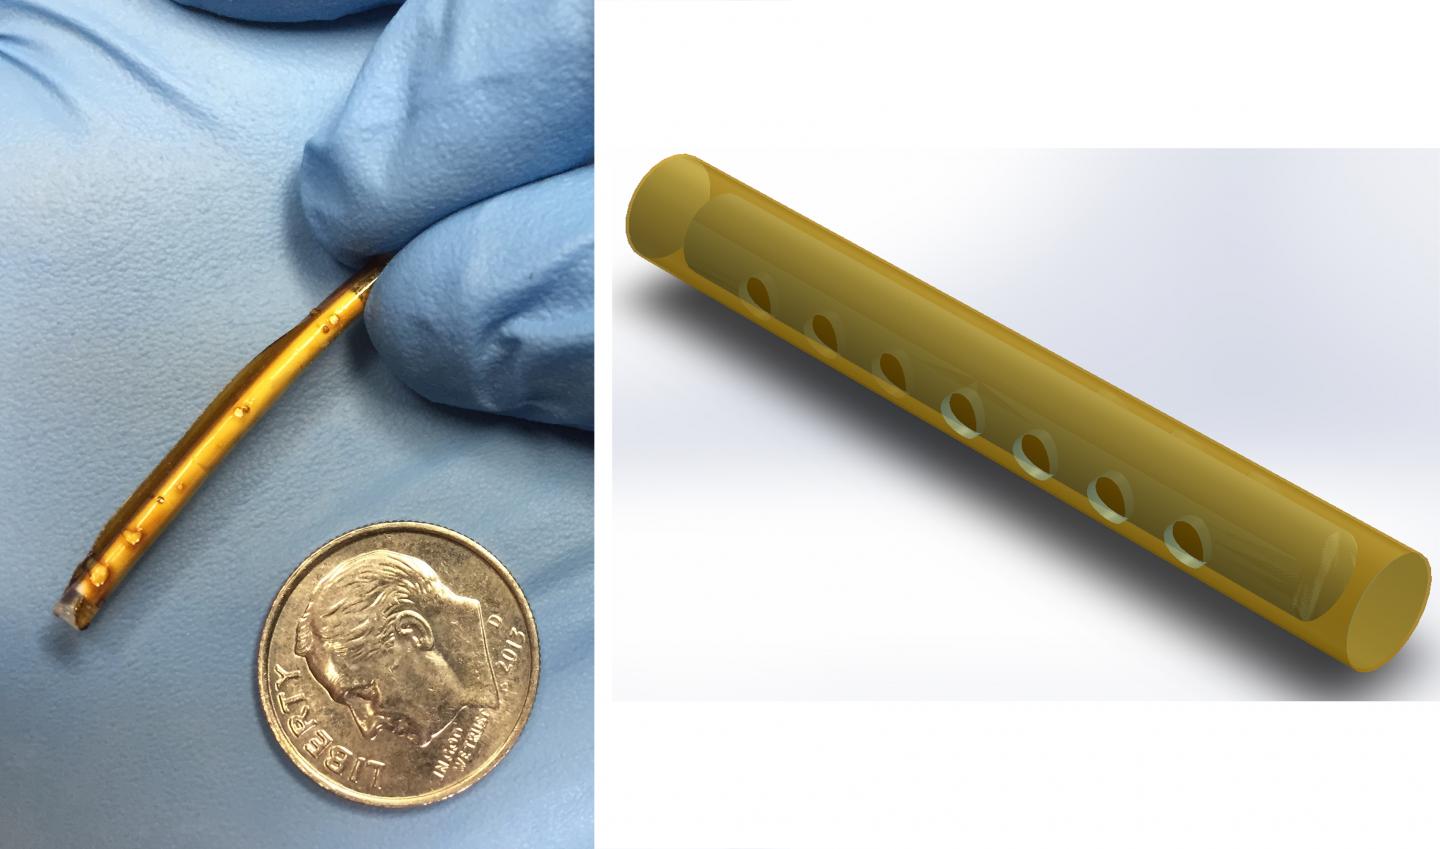 Novel TAF Subdermal Implant for the Prevention and Treatment of HIV/AIDS